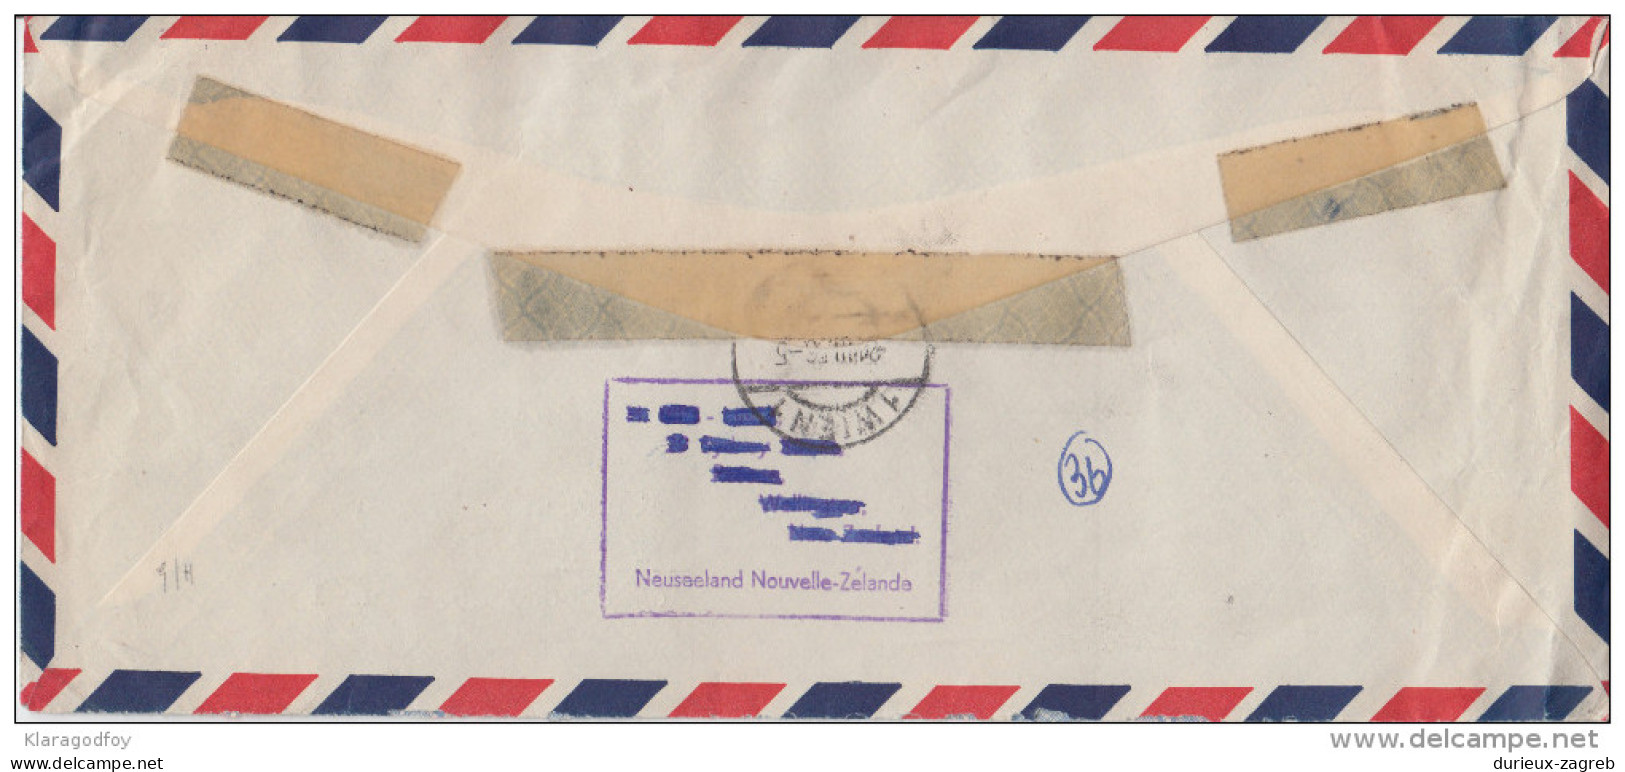 New Zealand Nice Air Mail Letter Cover Travelled To Austria 1956 B160711 - Covers & Documents